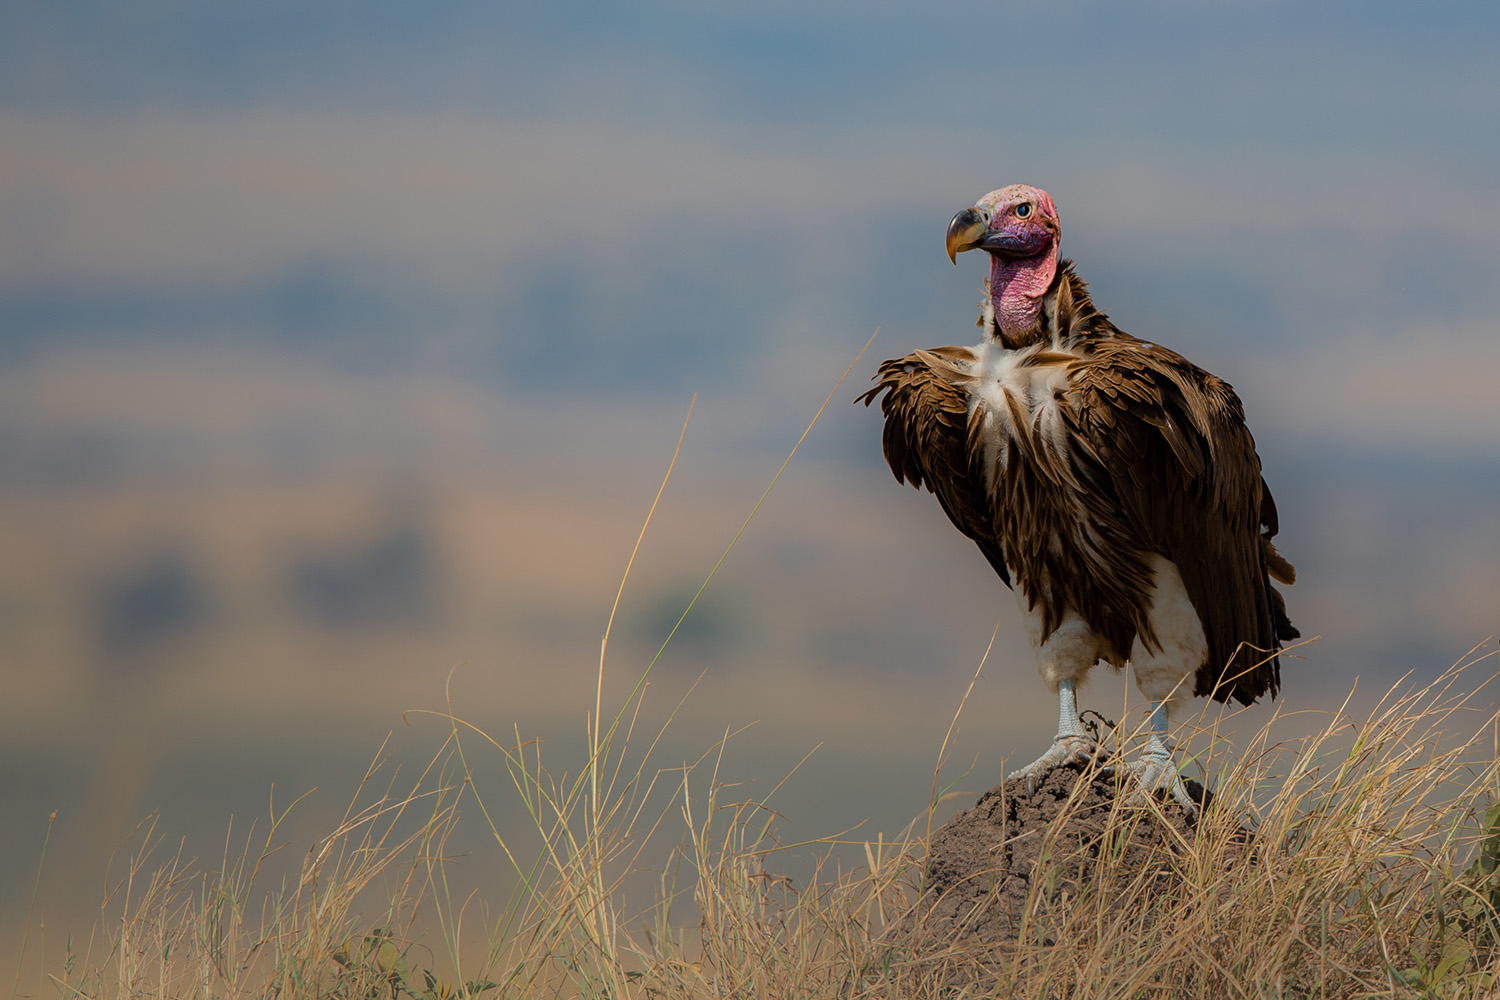 Vulture on the lookout in the mara plains